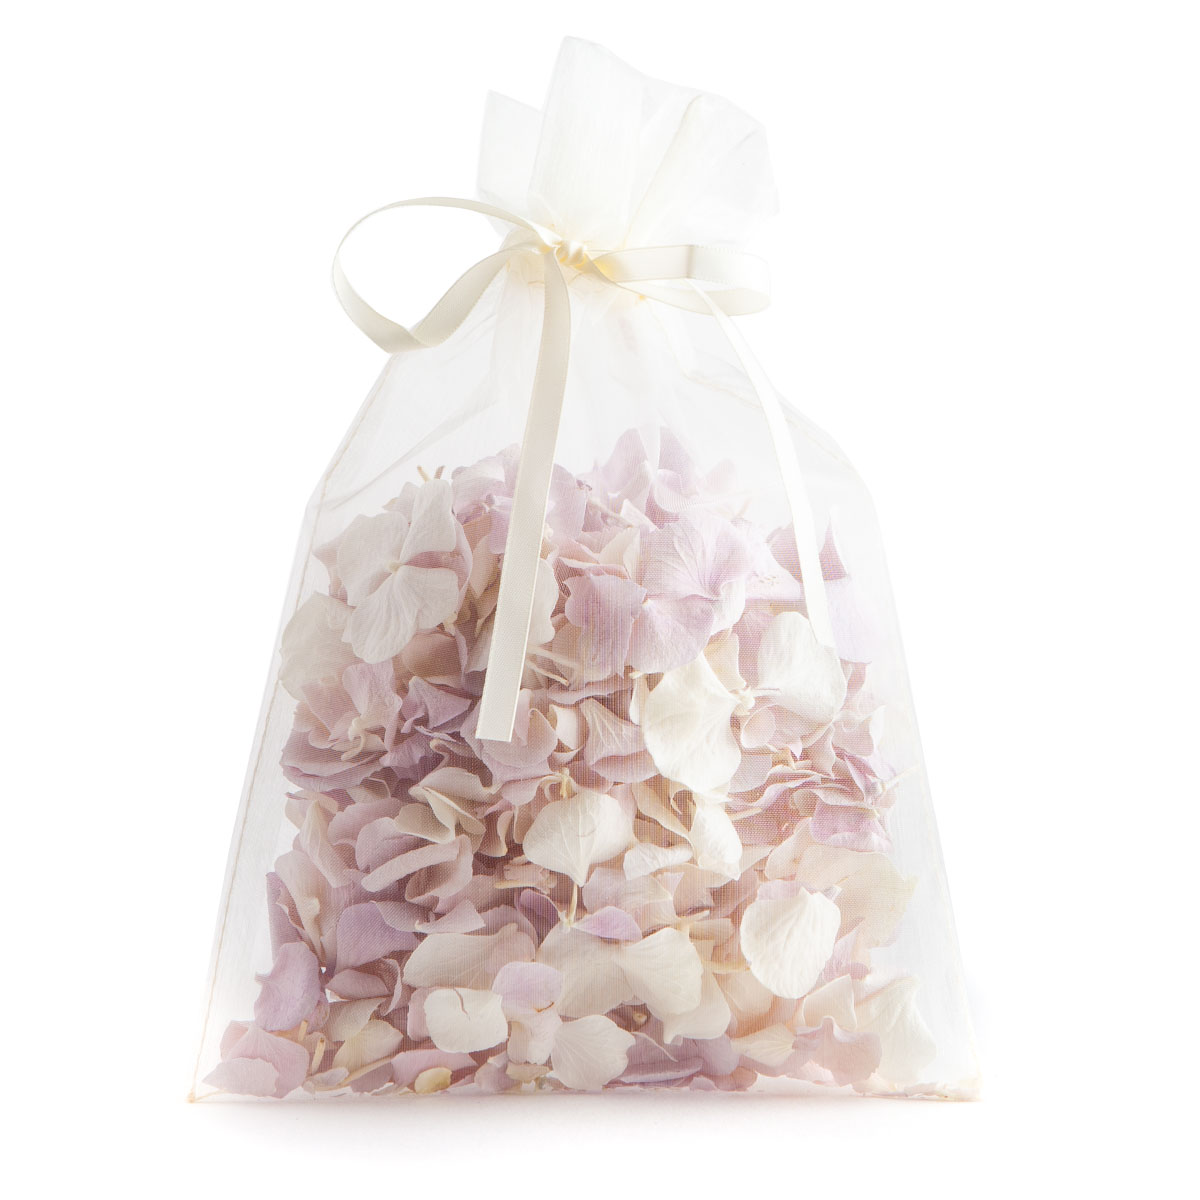 A bag of Lilac and White Hydrangea Petals